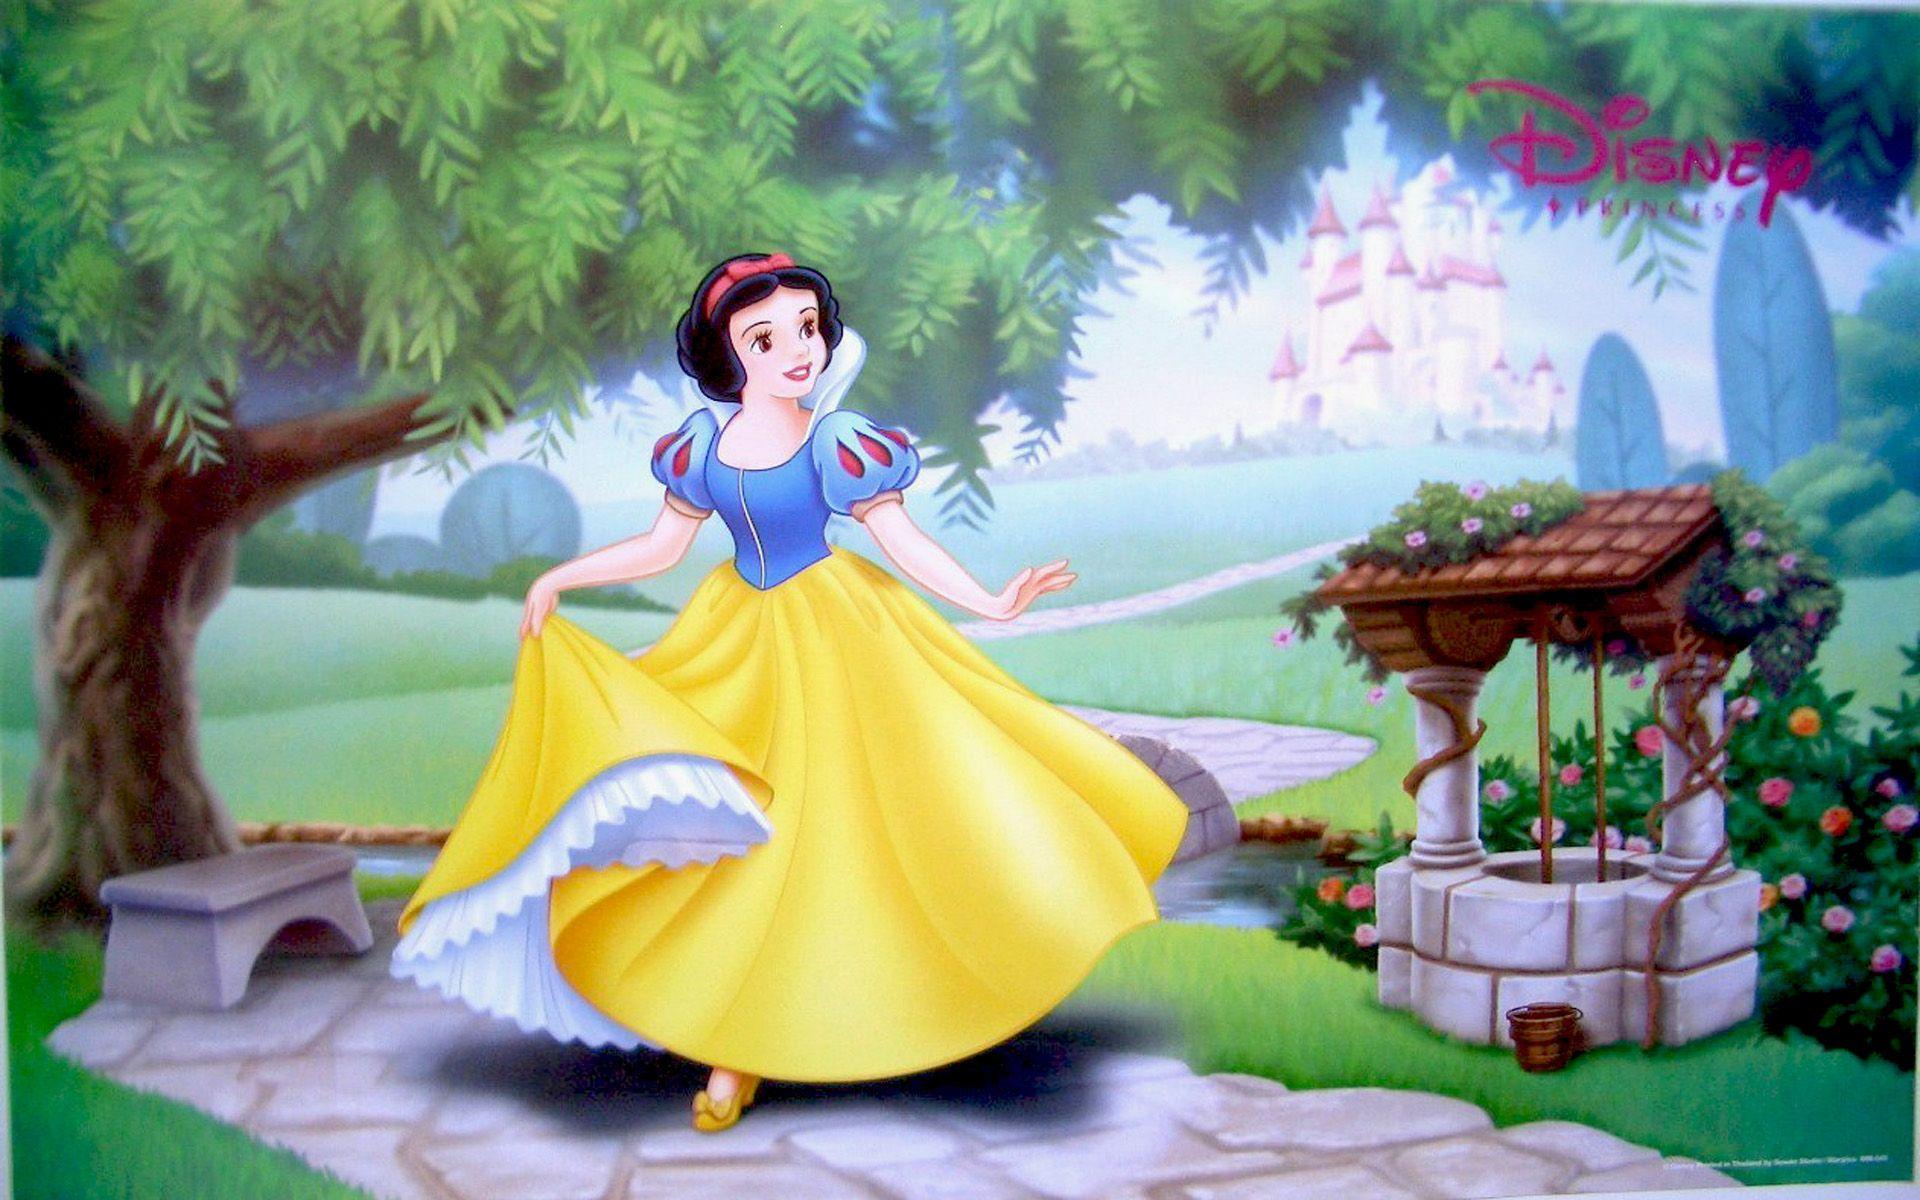 Snow White And The Seven Dwarfs Disney Wallpapers Wallpaper Cave